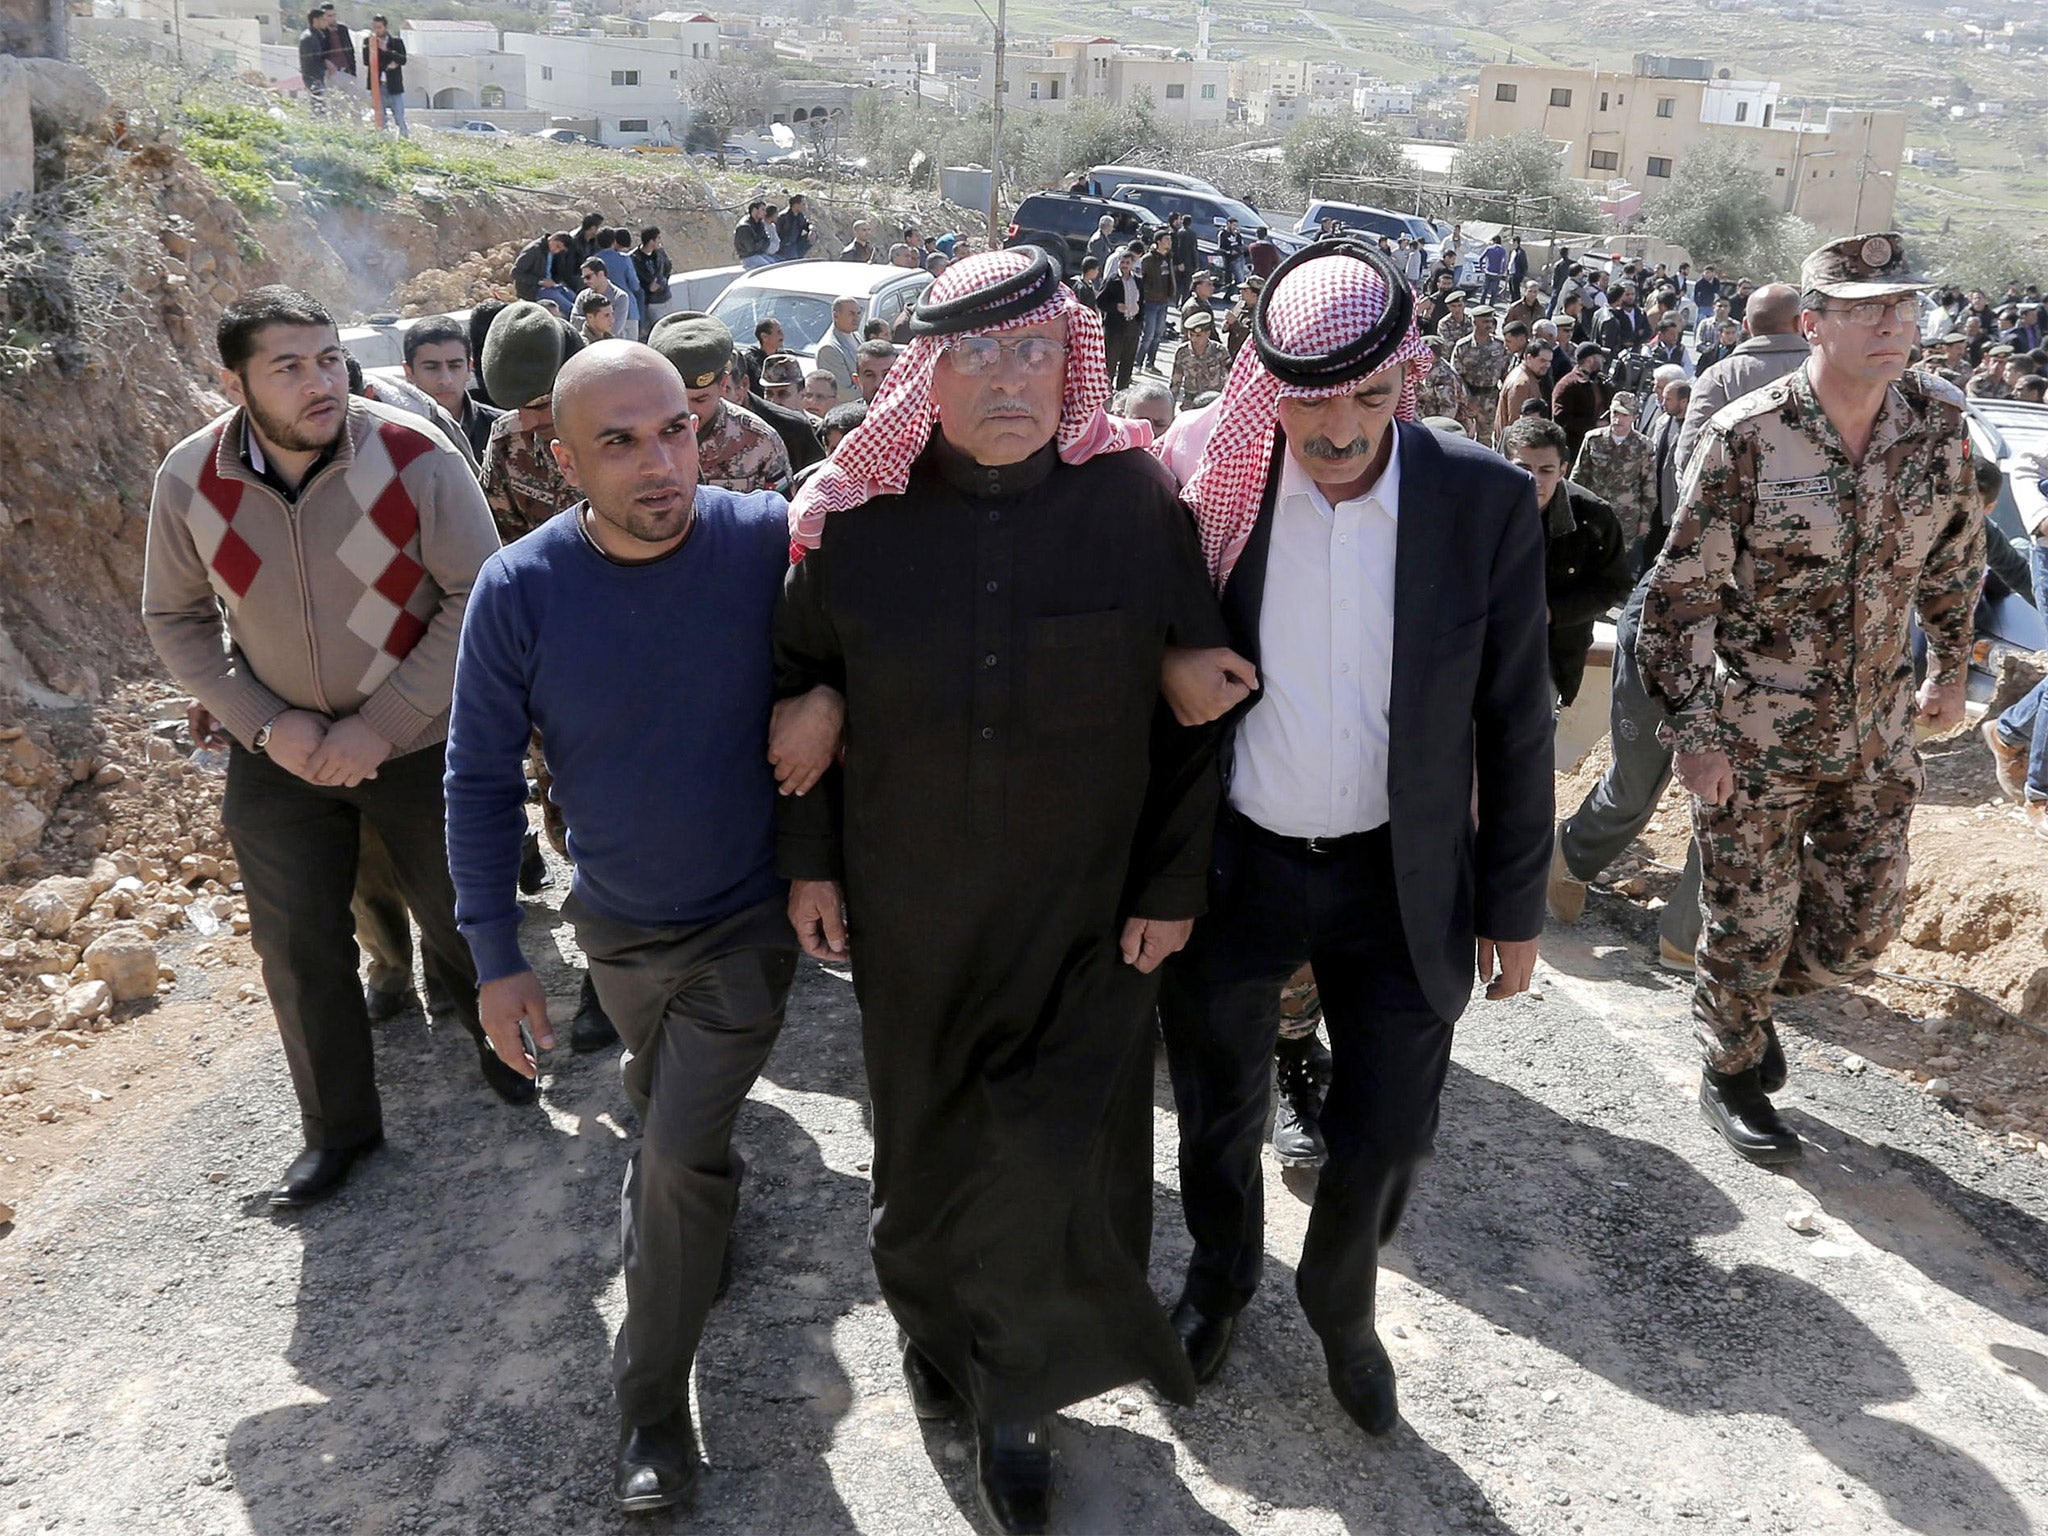 Safi al-Kasaesbeh (centre), father of Jordanian pilot Muath al-Kasaesbeh, who was killed by Isis on Monday, during a mourning ceremony in the Jordanian city of Karak